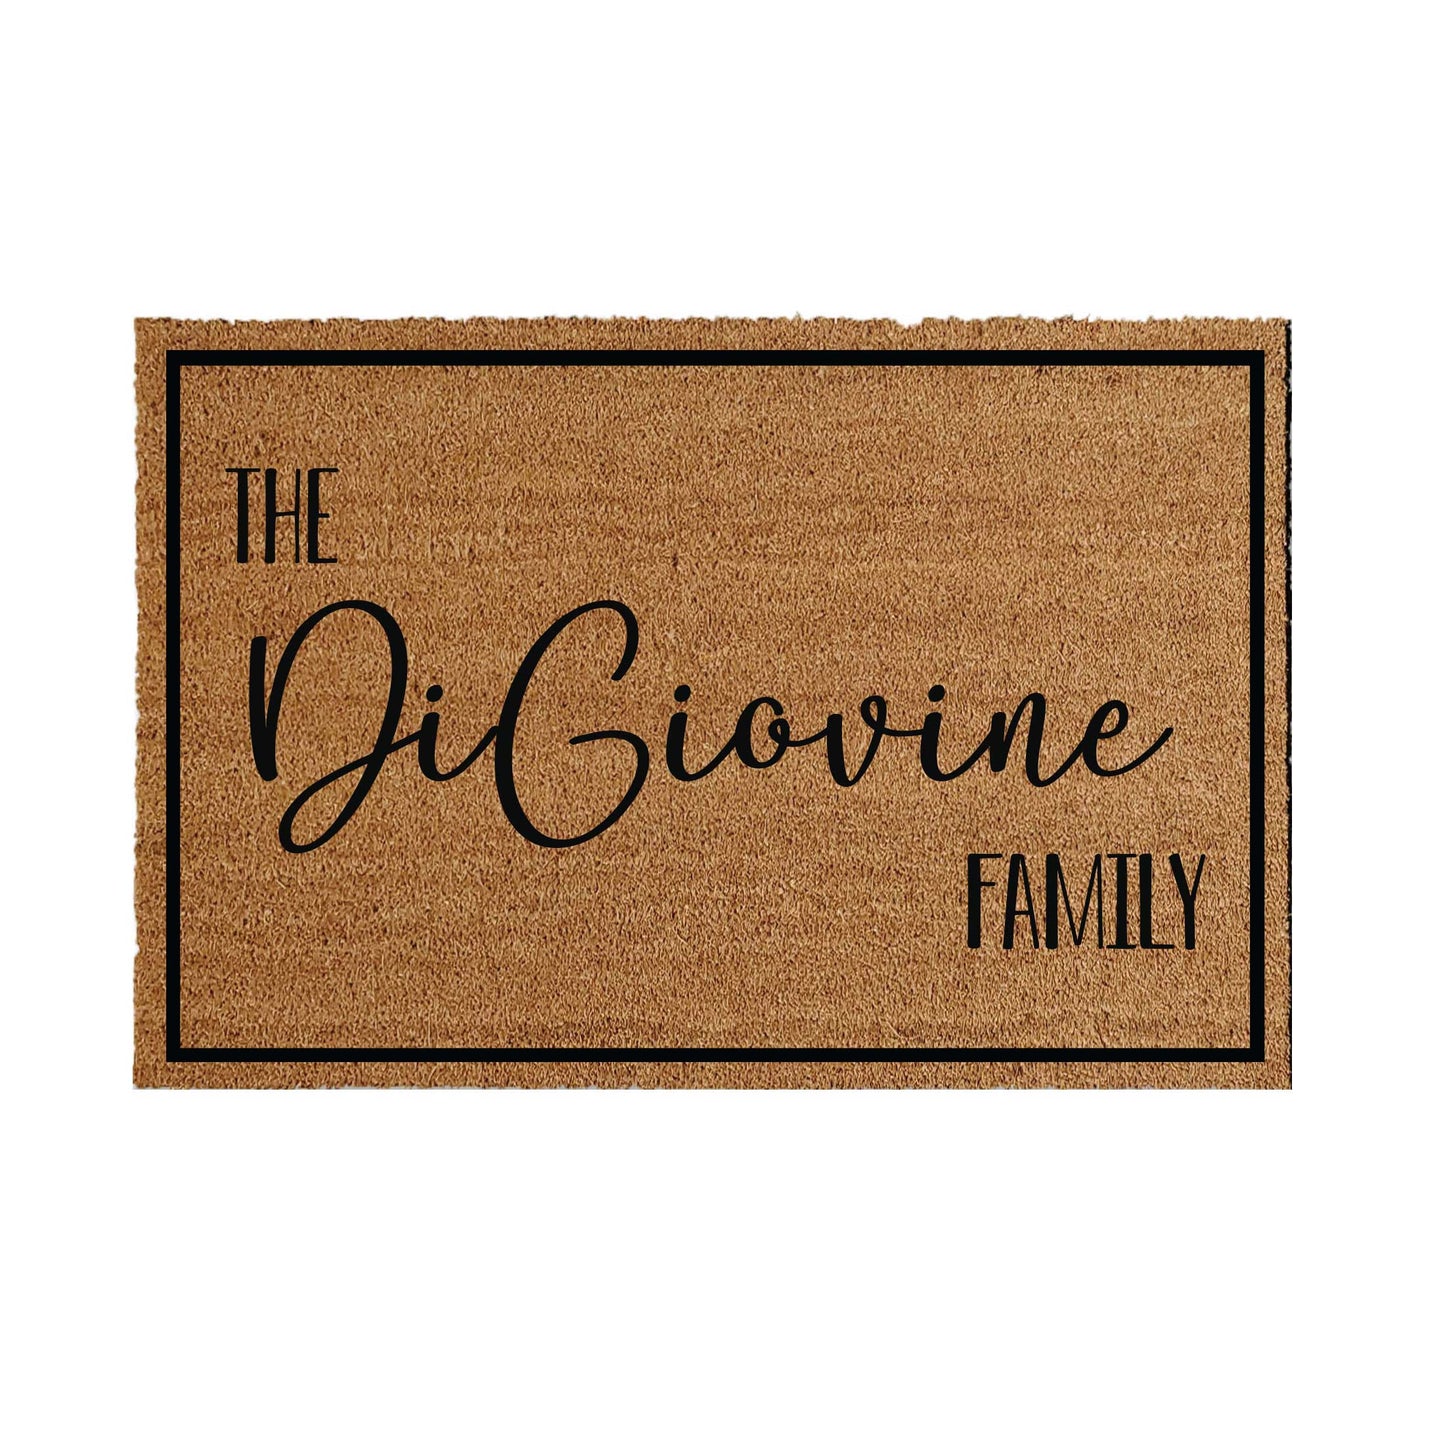 Custom coir doormat measuring 48 inches by 72 inches, featuring a personalized design or message. Made from natural coir fibers for durability and a classic look. Perfect for adding a welcoming touch to your entryway.